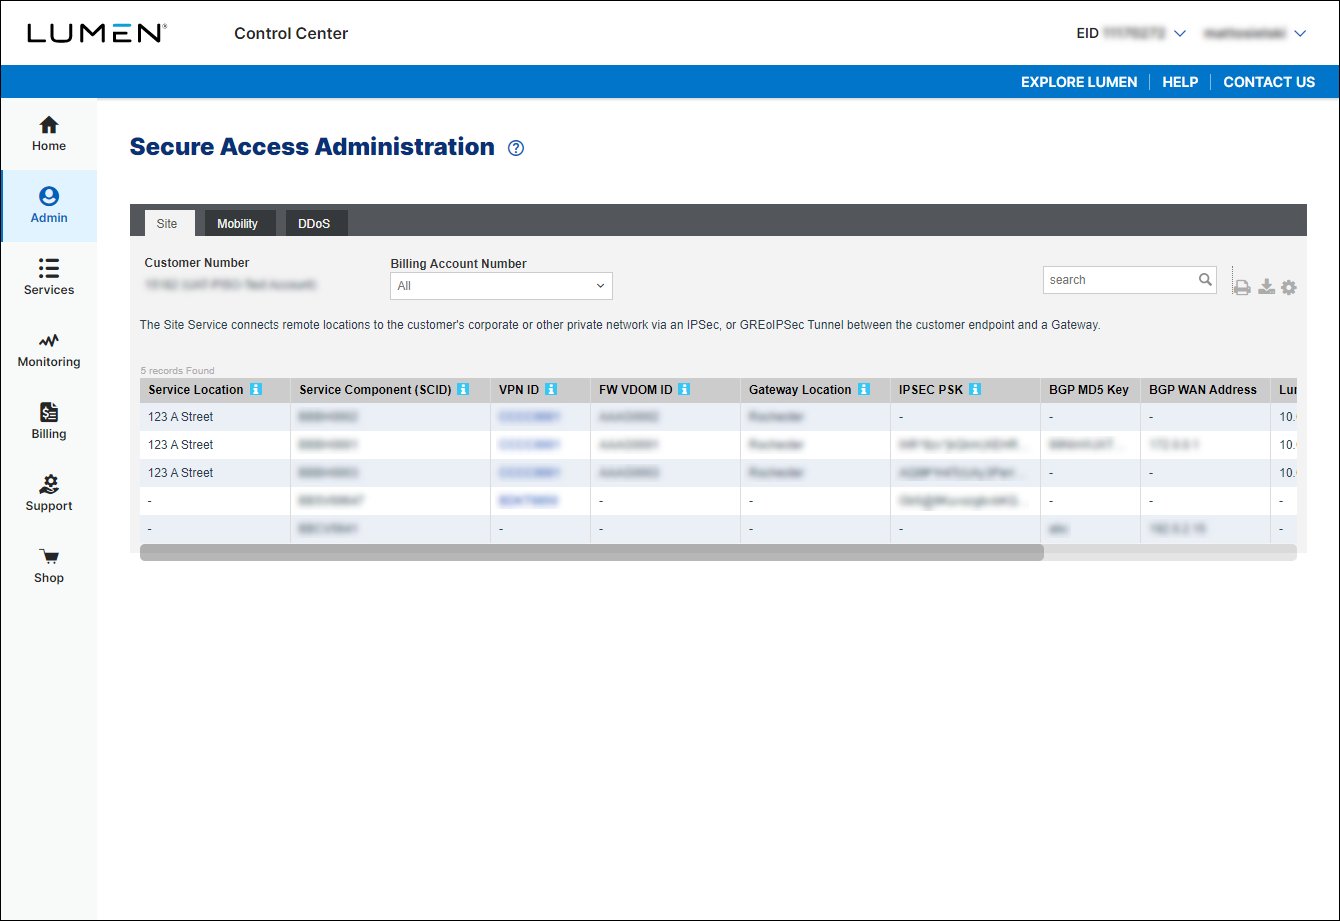 Secure Access Administration (showing Site tab)